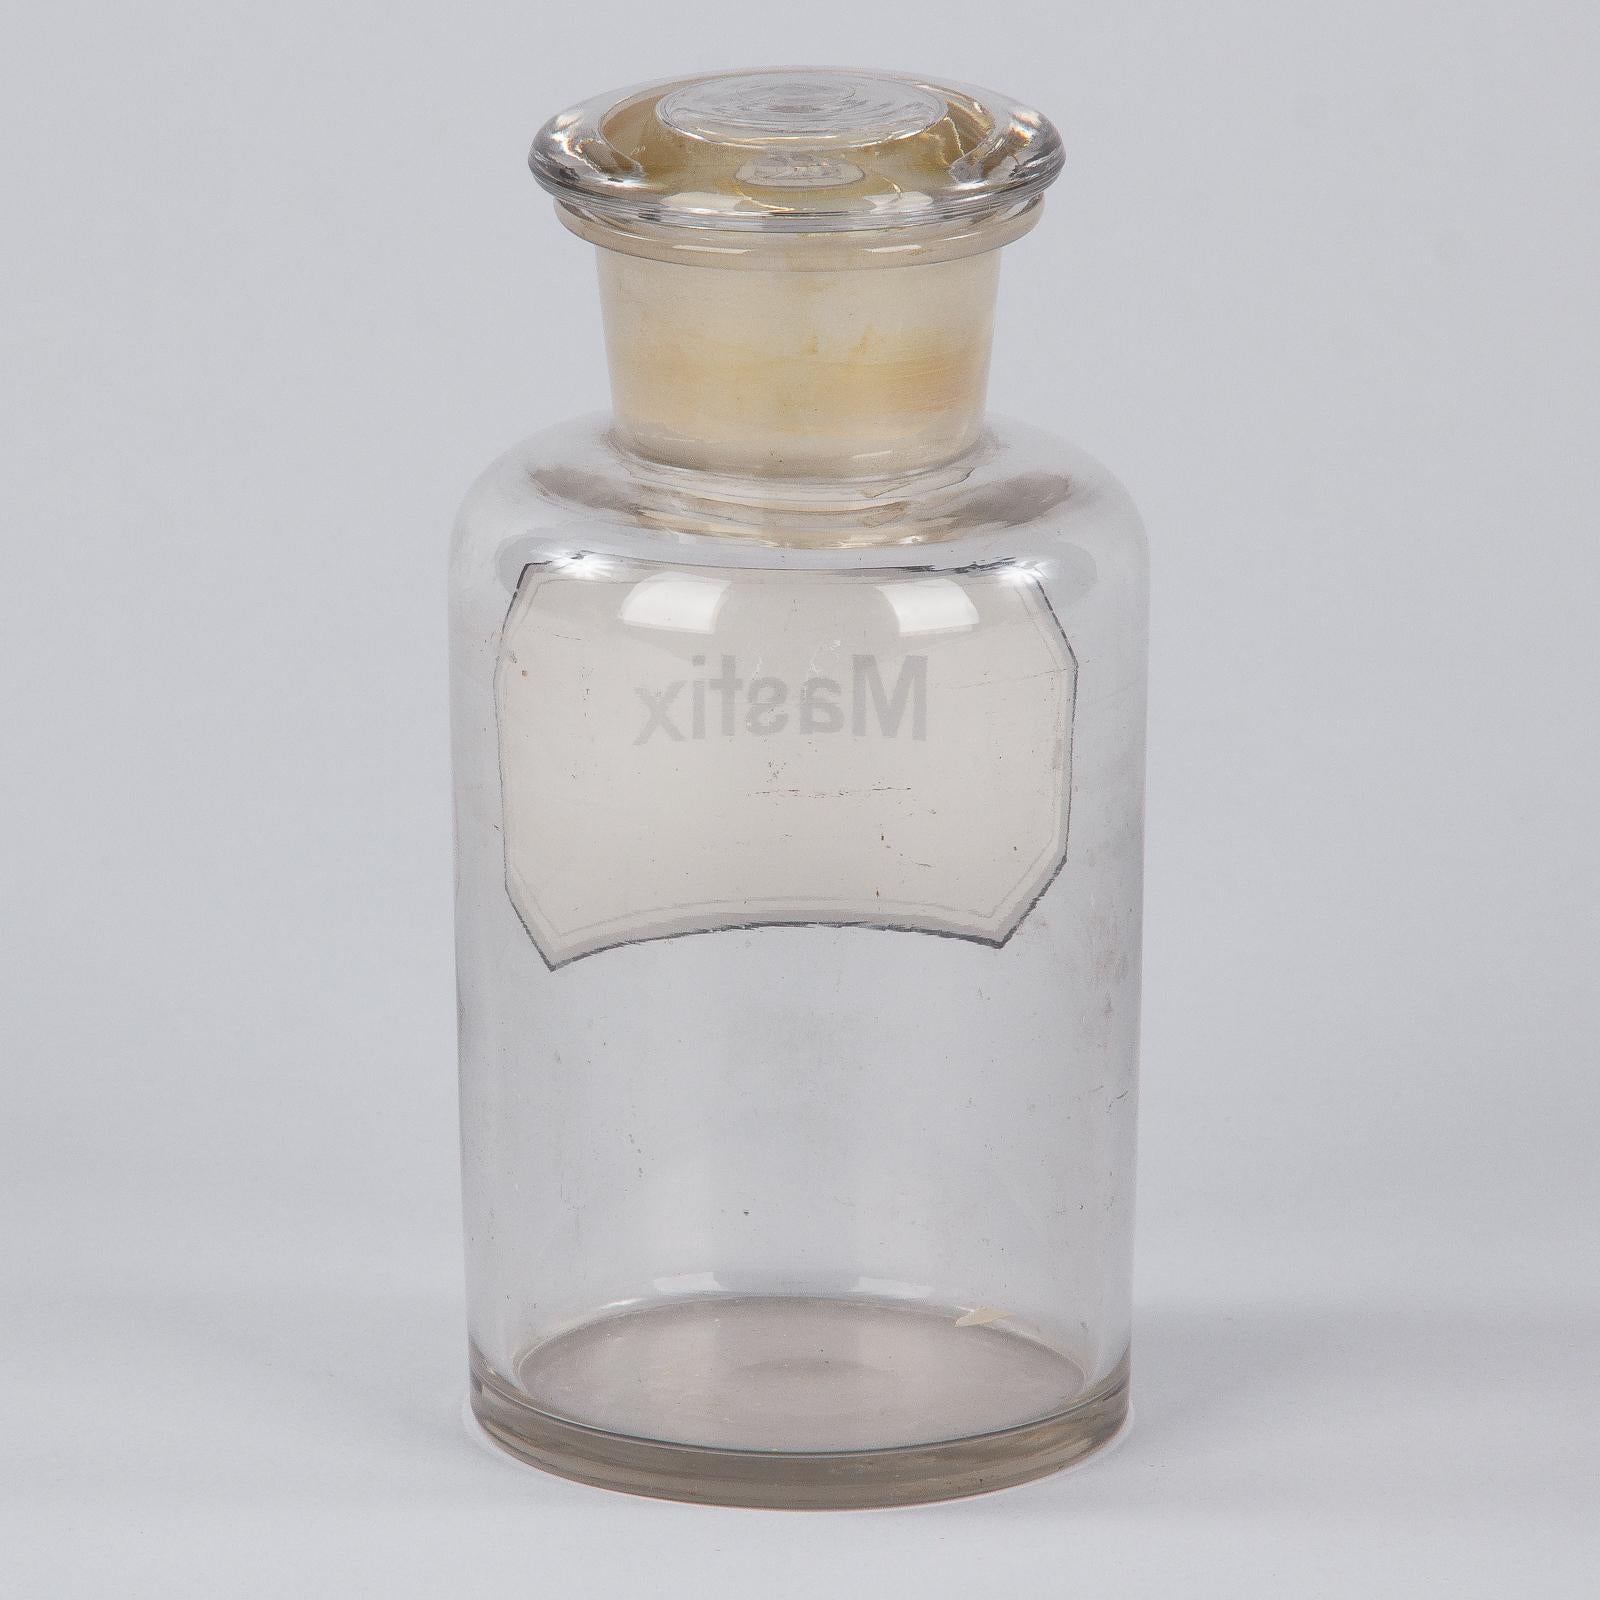 French Apothecary Glass Jar from Alsace Region, Early 1900s 10